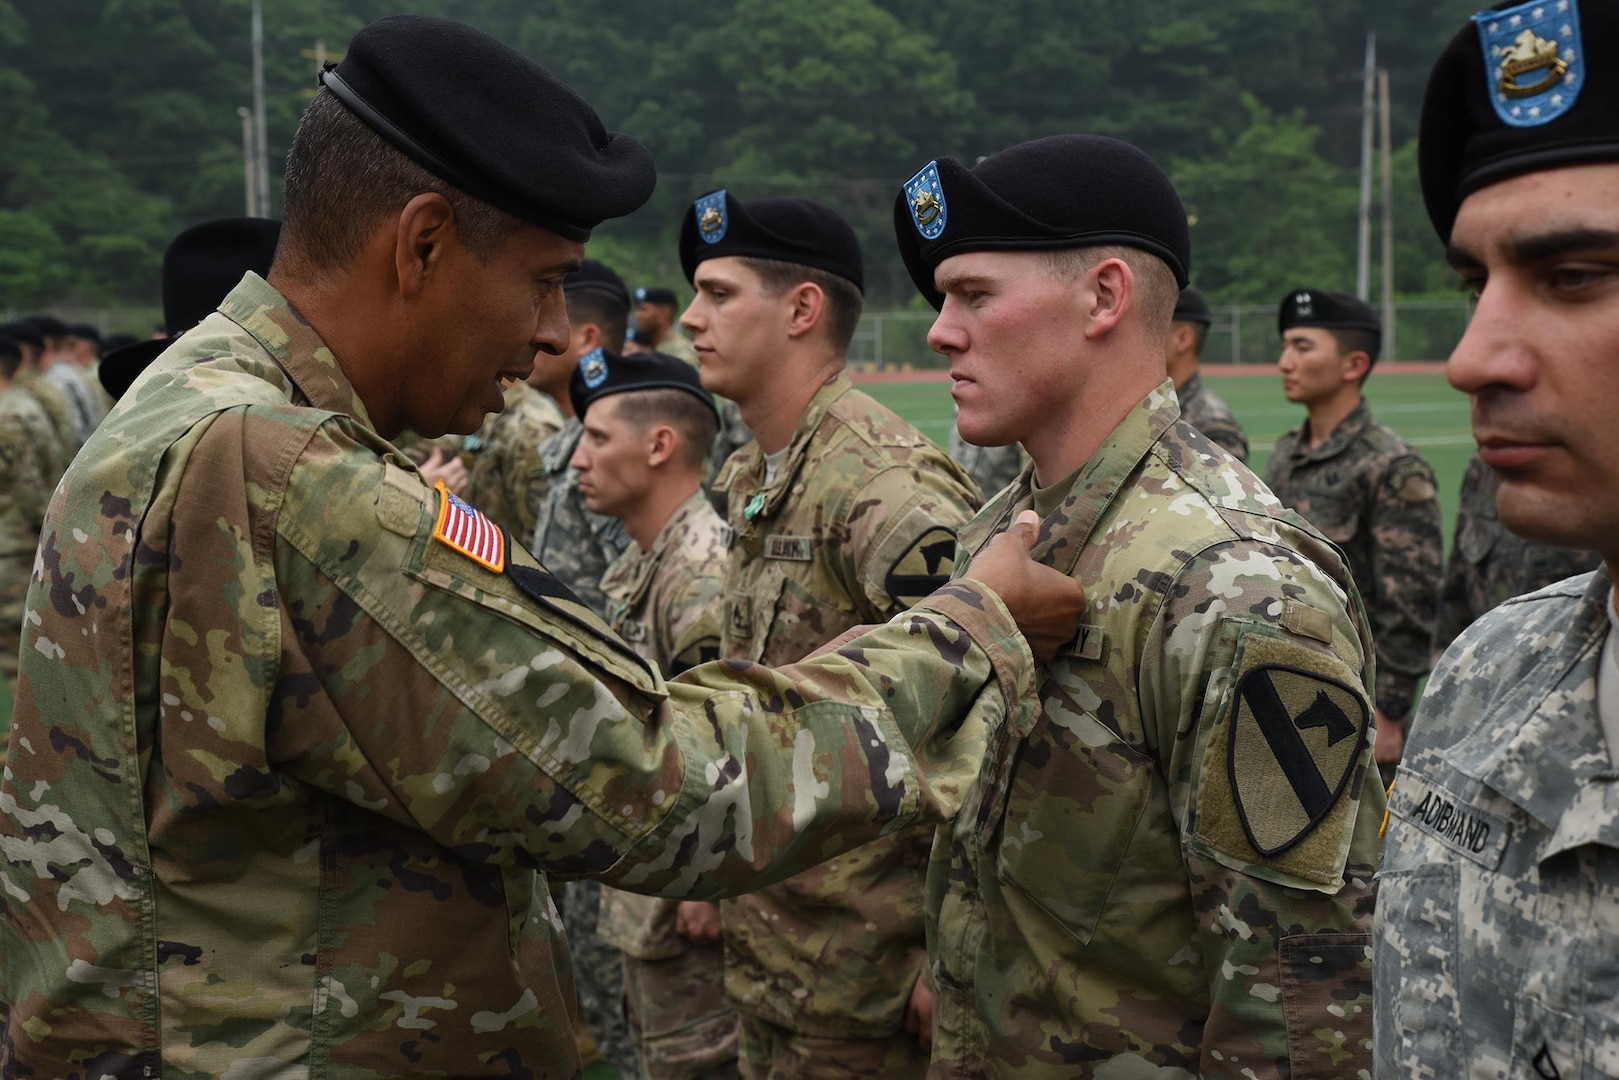 Gen. Vincent Brooks, commanding general, USFK, pins a U.S. Army Commendation Medal on Sgt. Andrew Raines, Company A, 2nd Battalion, 8th Cavalry Regiment, 1st Armored Brigade Combat Team, 1st Cavalry Division, for successfully completing every event without retest and receiving first time “go’s” on every evaluation to earn the Expert Infantryman Badge, a “True Blue” awardee. 131 U.S. and South Korean Soldiers earned the Expert Infantryman Badge, with 29 achieving “True Blue” status, during a ceremony May 26 at Camp Casey, South Korea. (U.S. Army photo by Staff Sgt. Keith Anderson, 1st Armored Brigade Combat Team Public Affairs, 1st Cav. Div.)